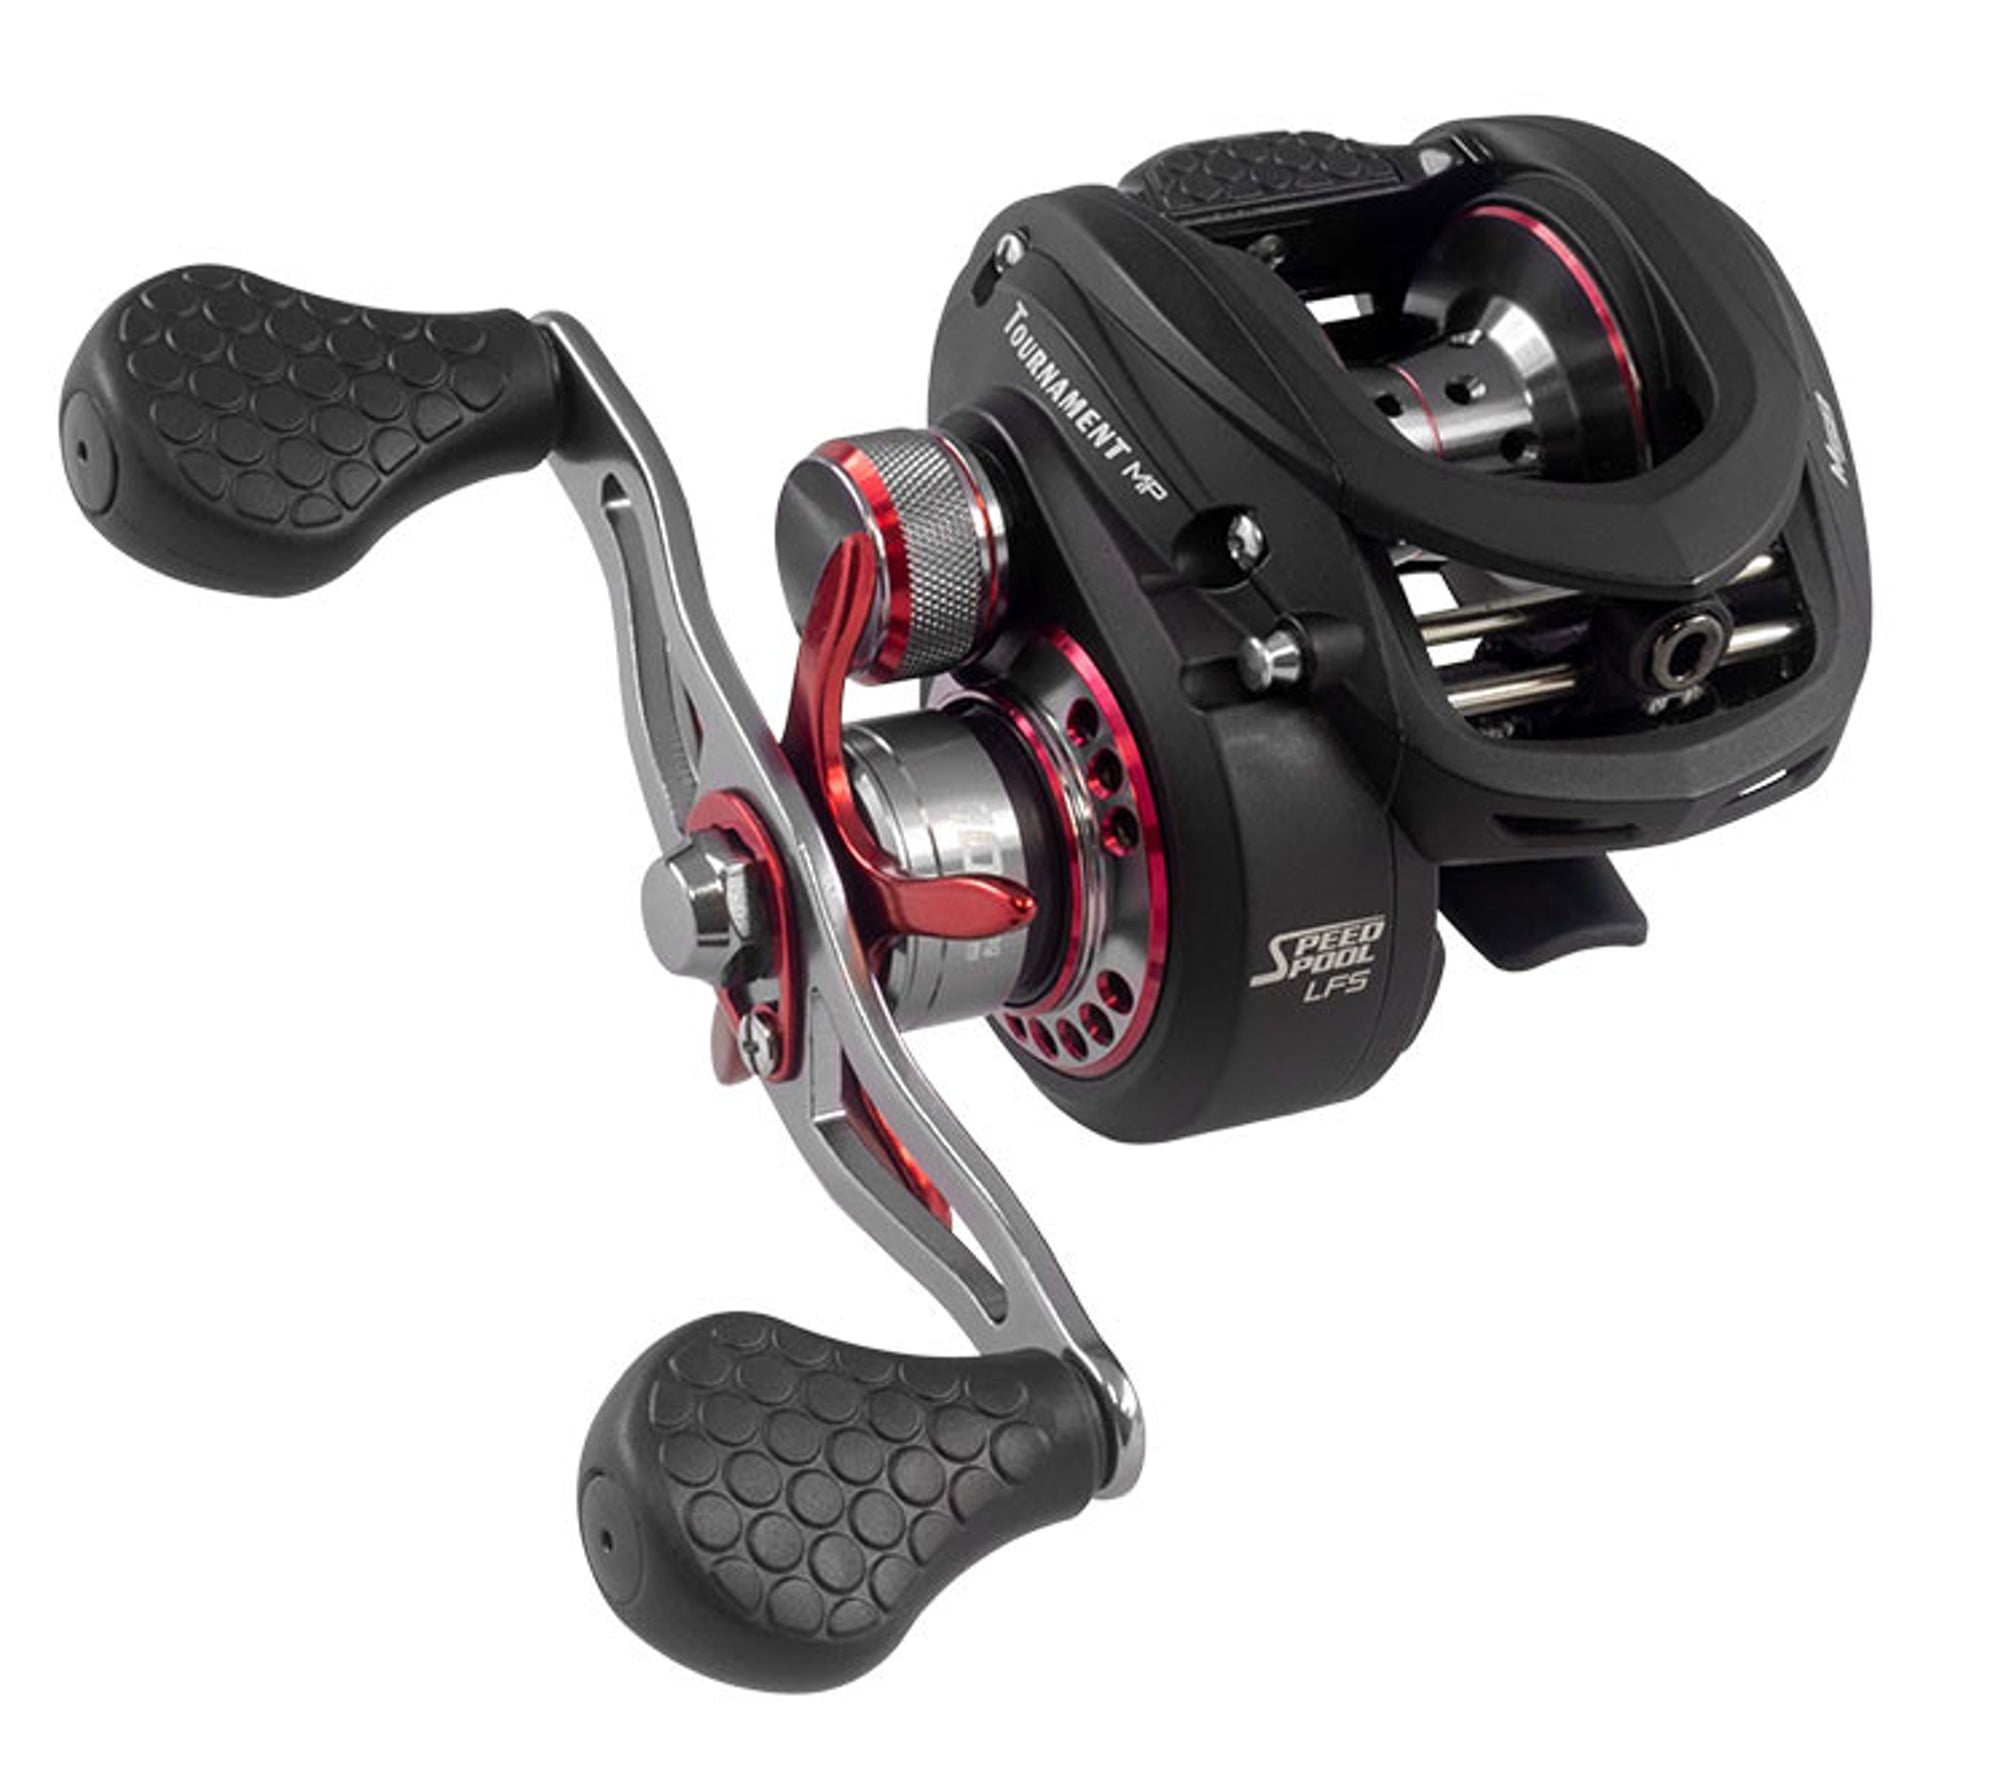 AAP 1pc 5' 6 MH Spin, 8 to 15LB, Fixed Reel Seat for Bass Jig